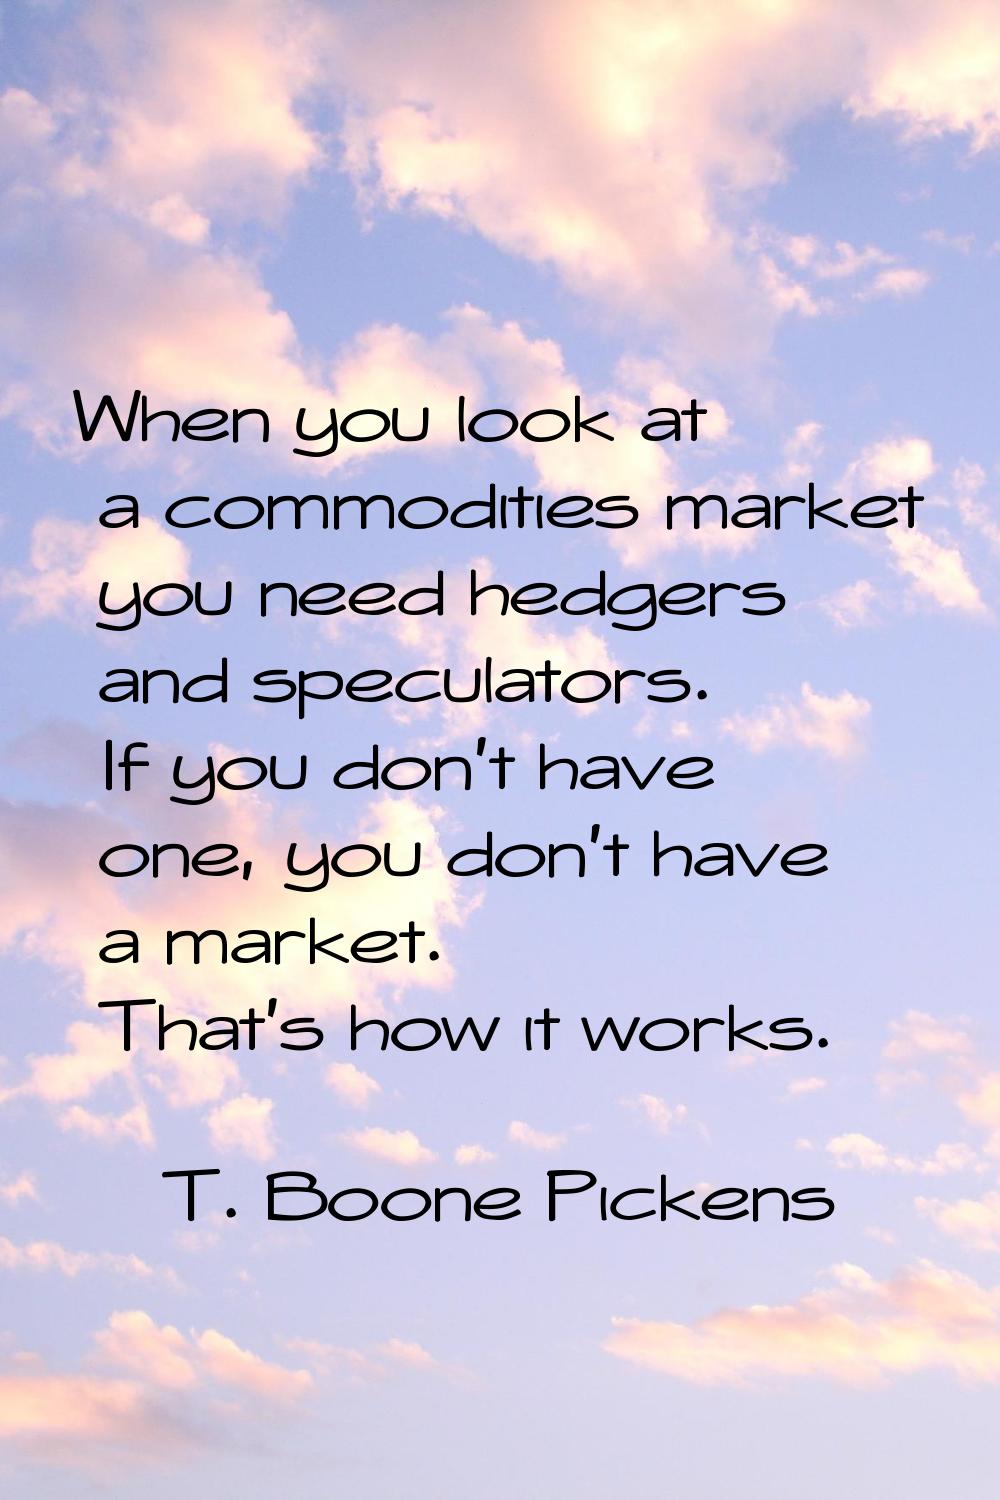 When you look at a commodities market you need hedgers and speculators. If you don't have one, you 